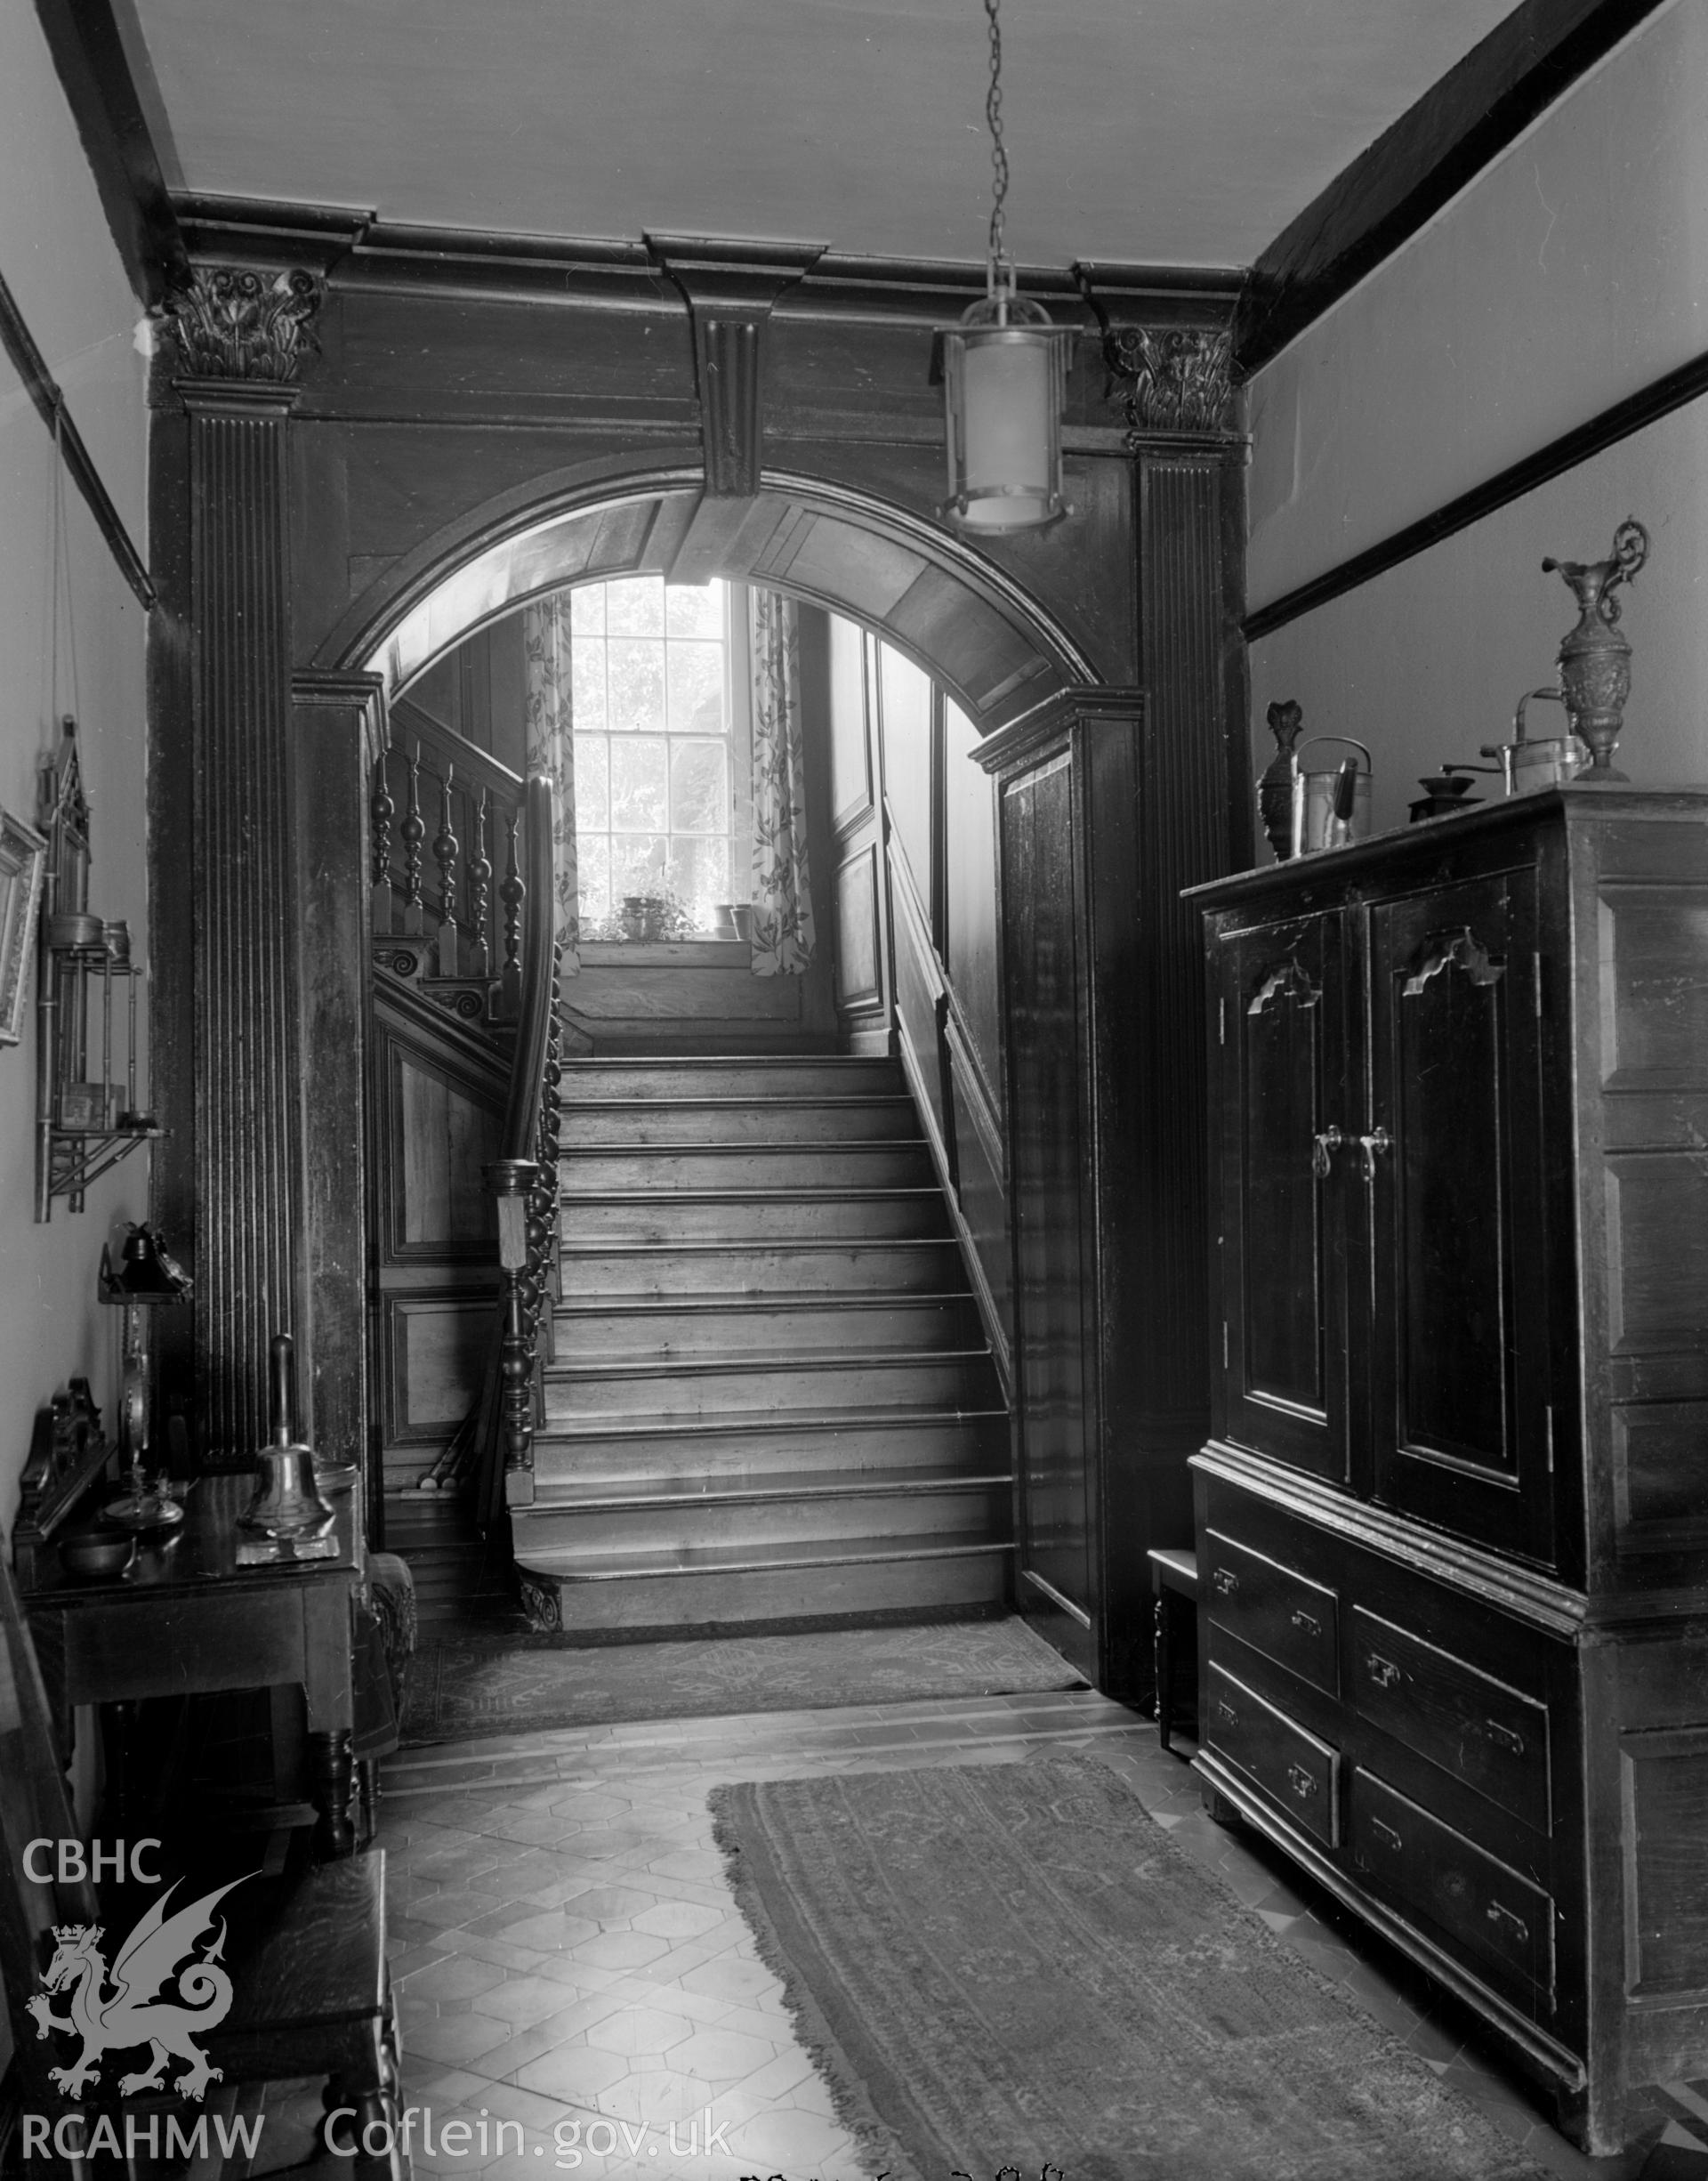 A view of a traditional hallway, showing wooden arch way .